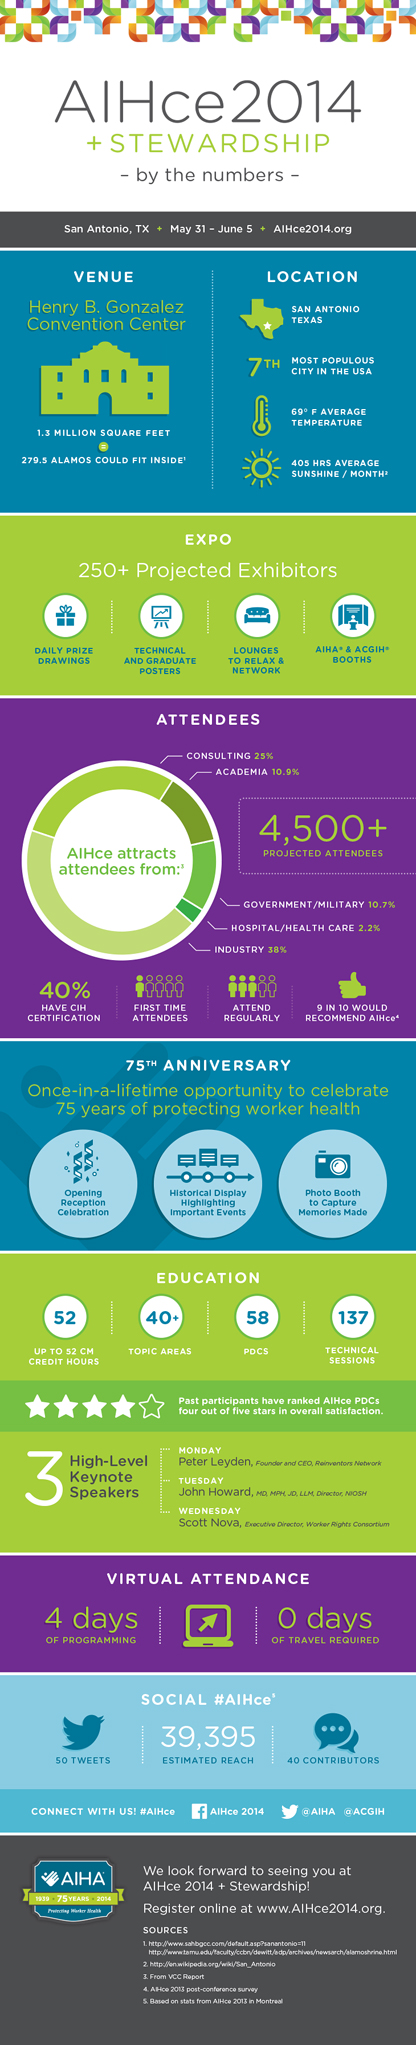 AIHce by the Numbers infographic